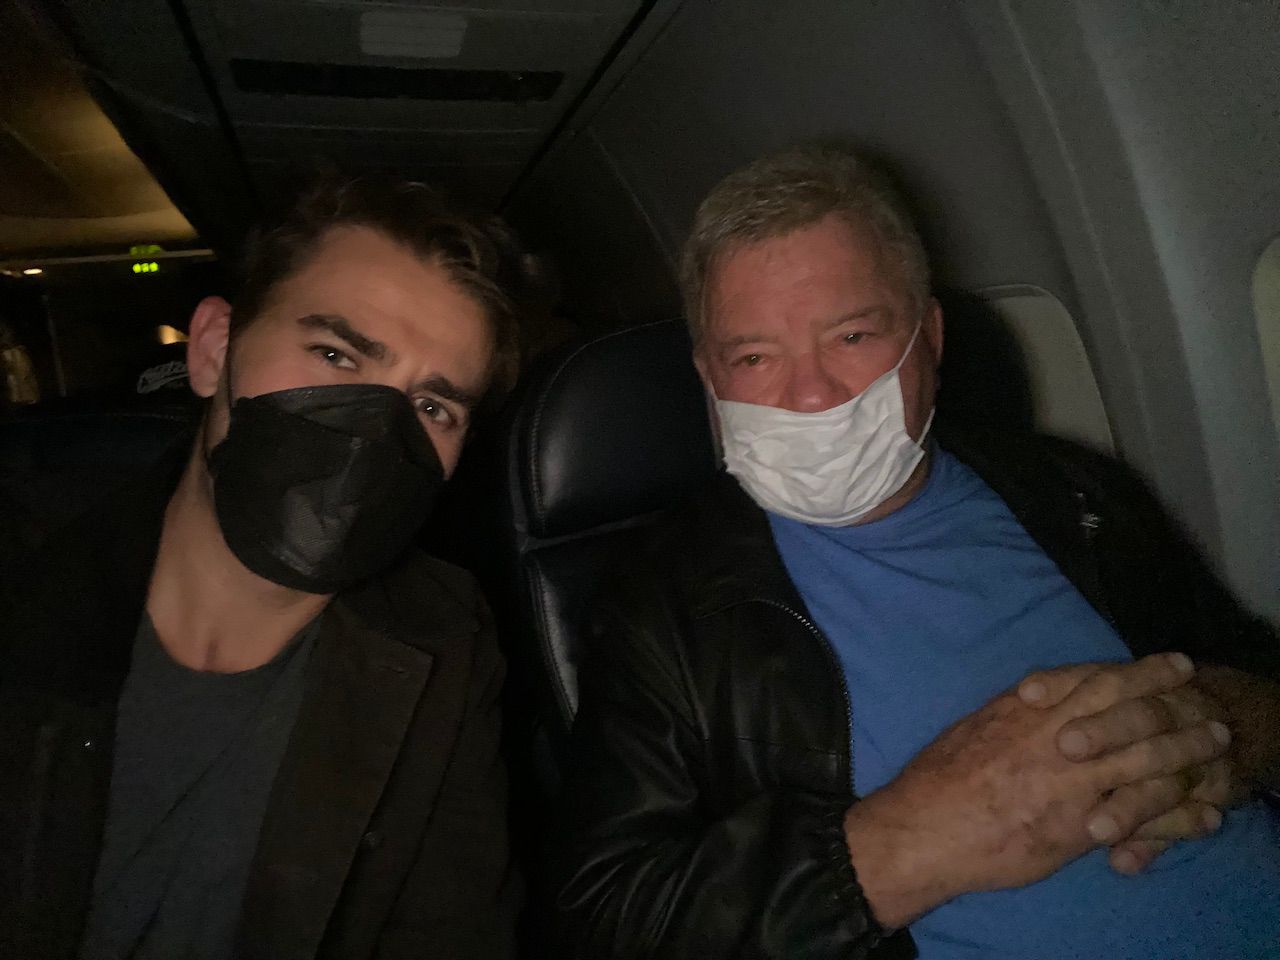 Shatner and Wesley